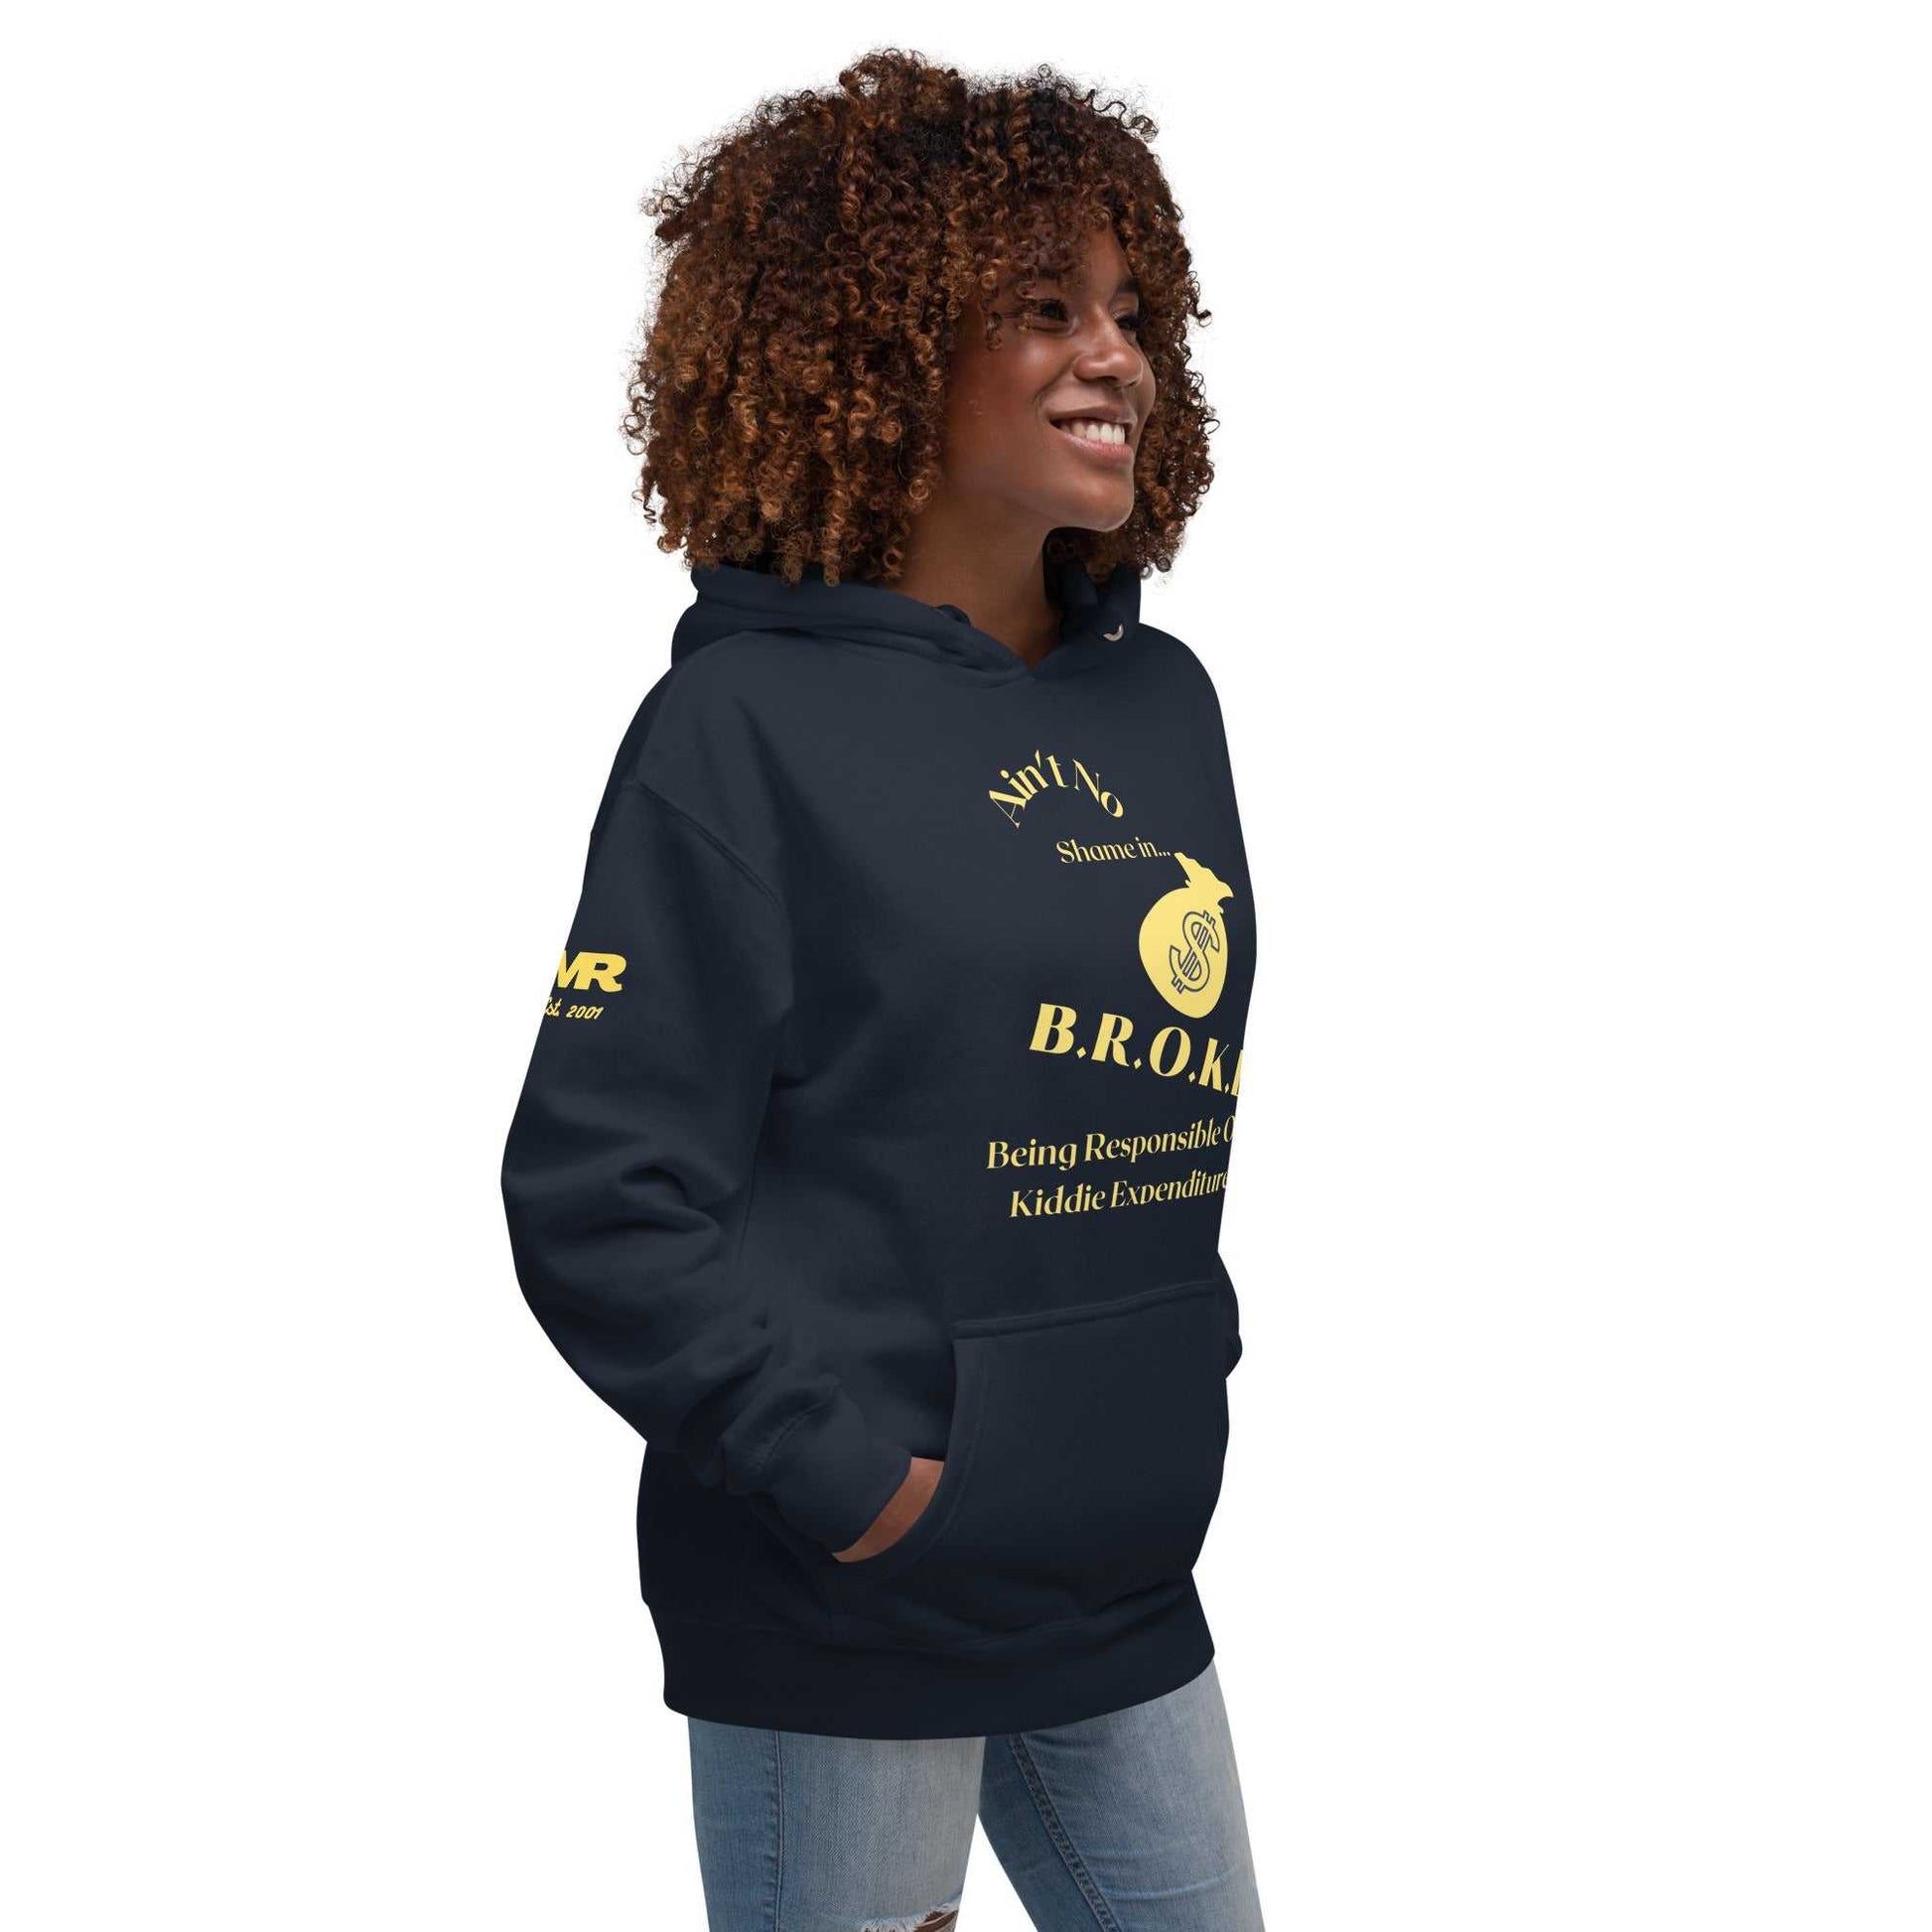 JMR Broke Special Edition Navy/Yellow Unisex Hoodie The JMR Collection Hoodie Good Vibes Daily Lab 54